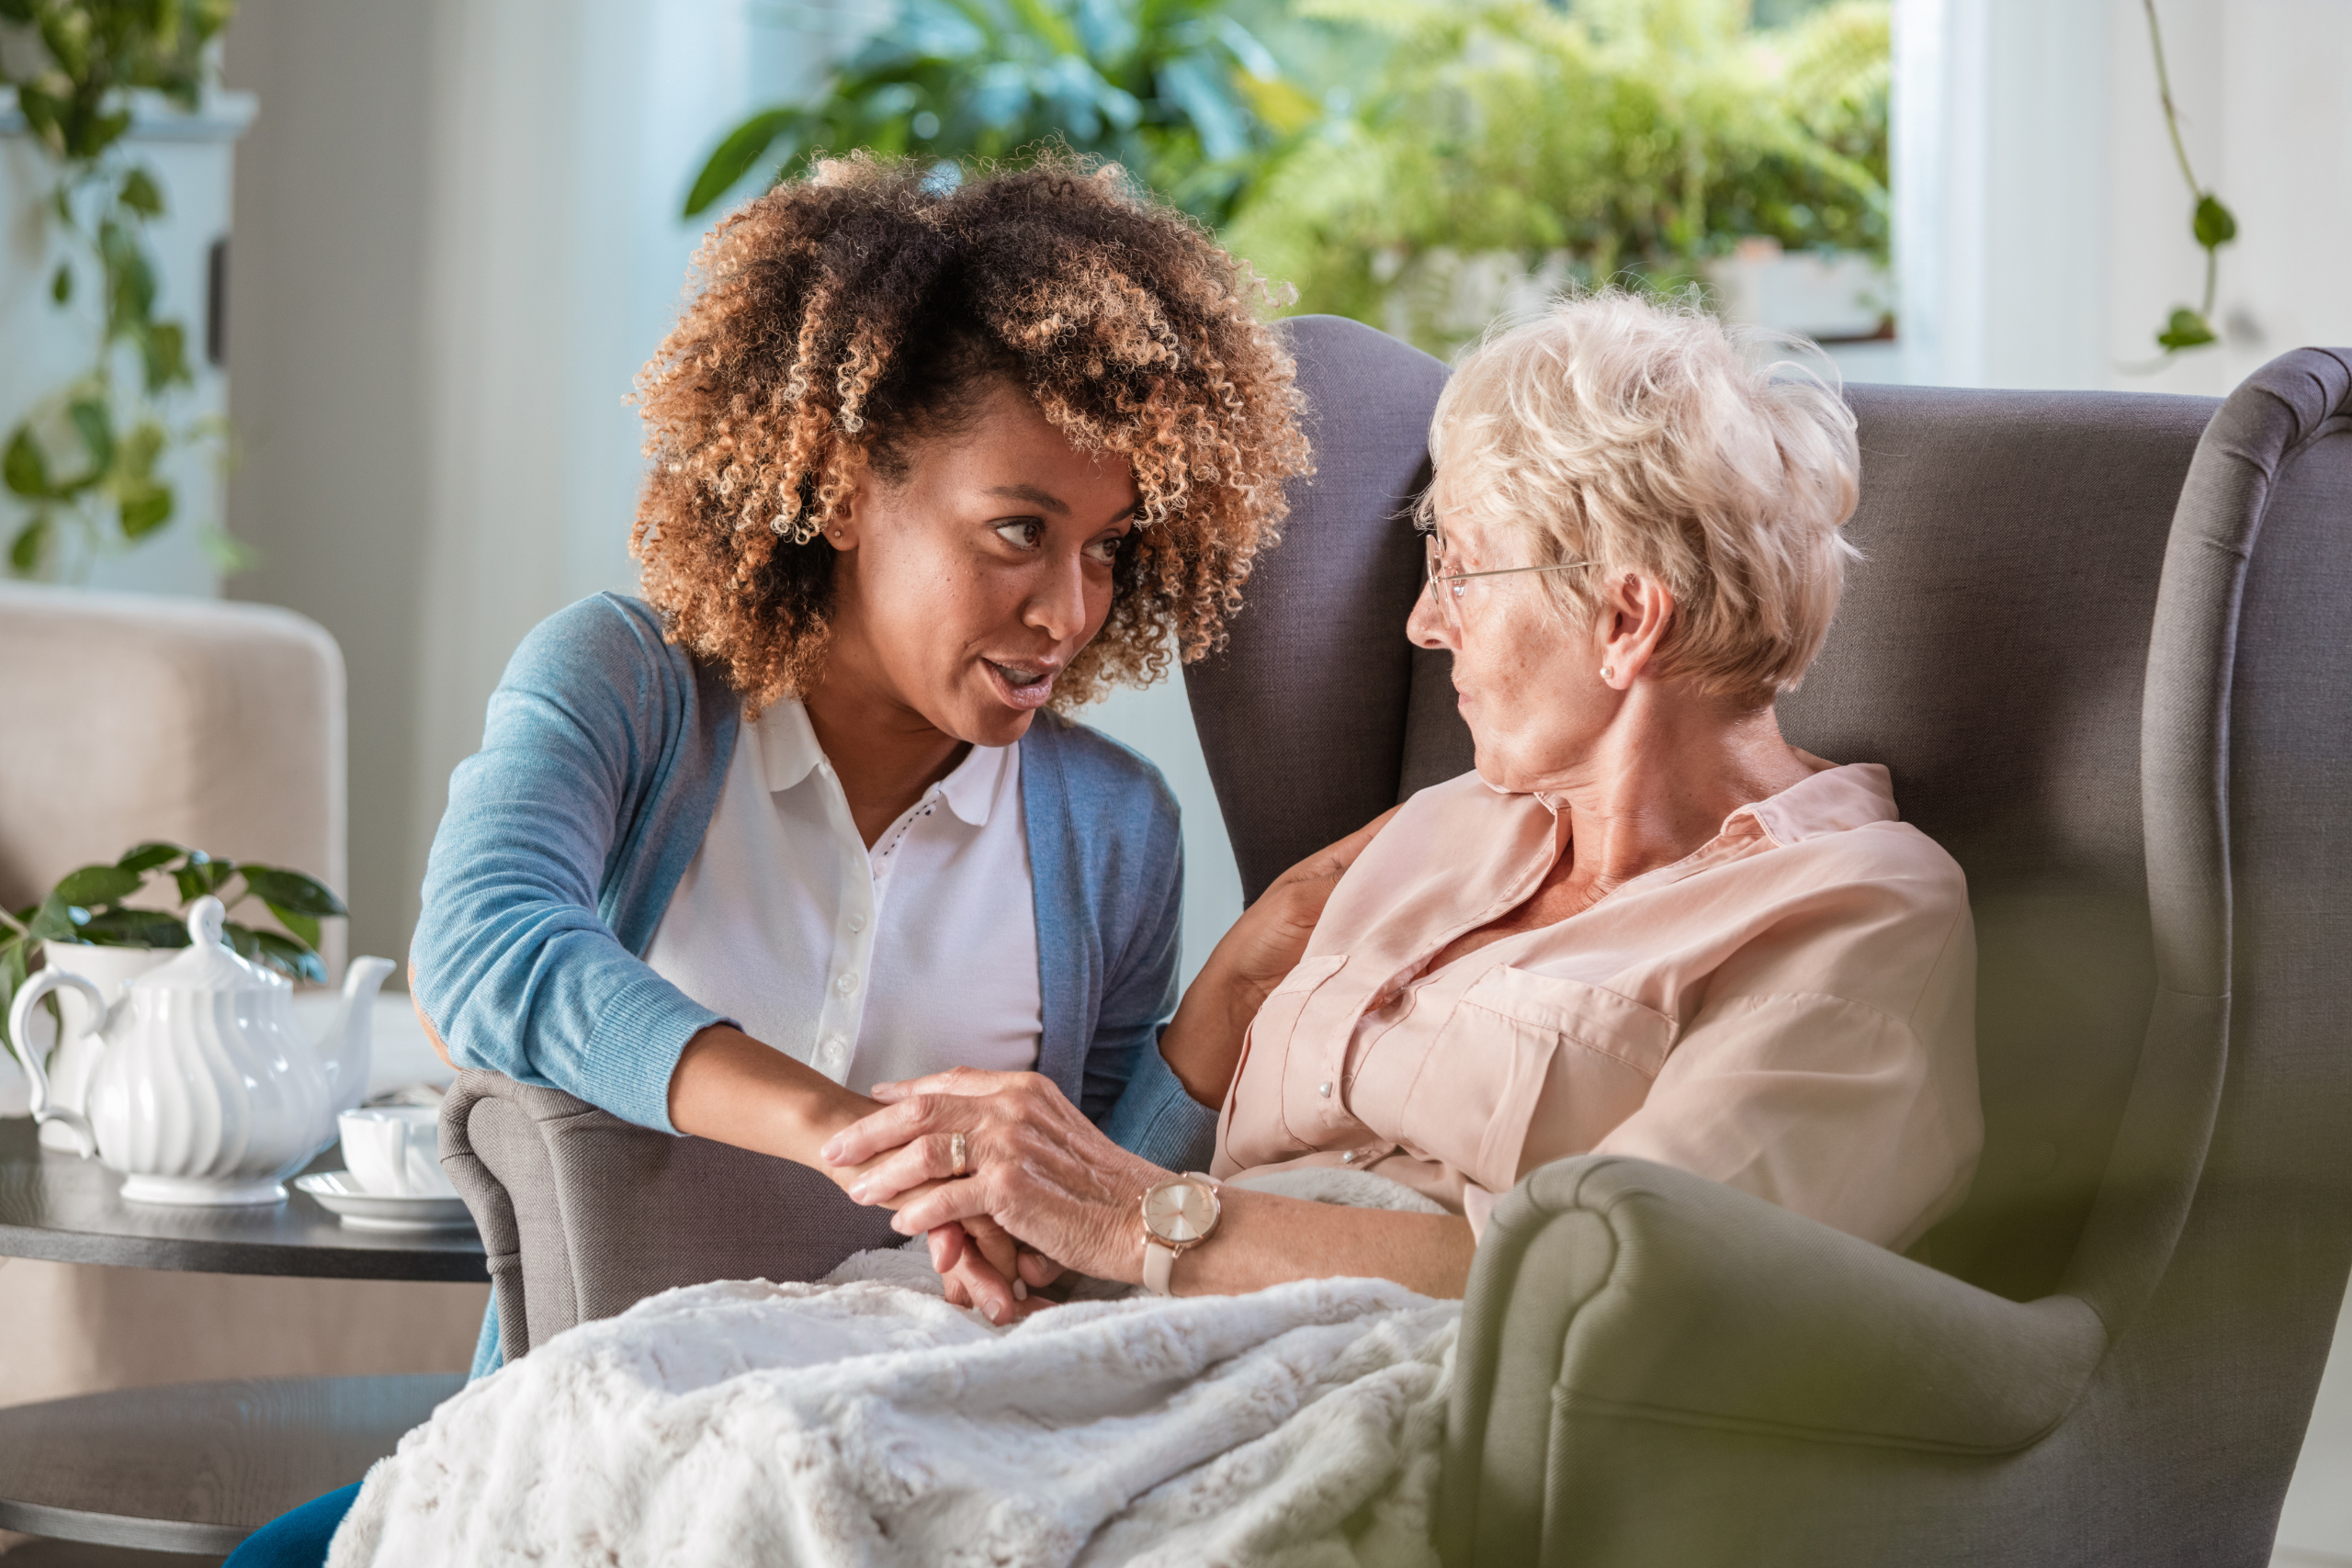 A compassionate young woman holds hands with an elderly lady while engaging in a heartfelt conversation, showcasing a moment of understanding and personal care, aligning with the concept of being an expert on your loved one's needs and well-being.